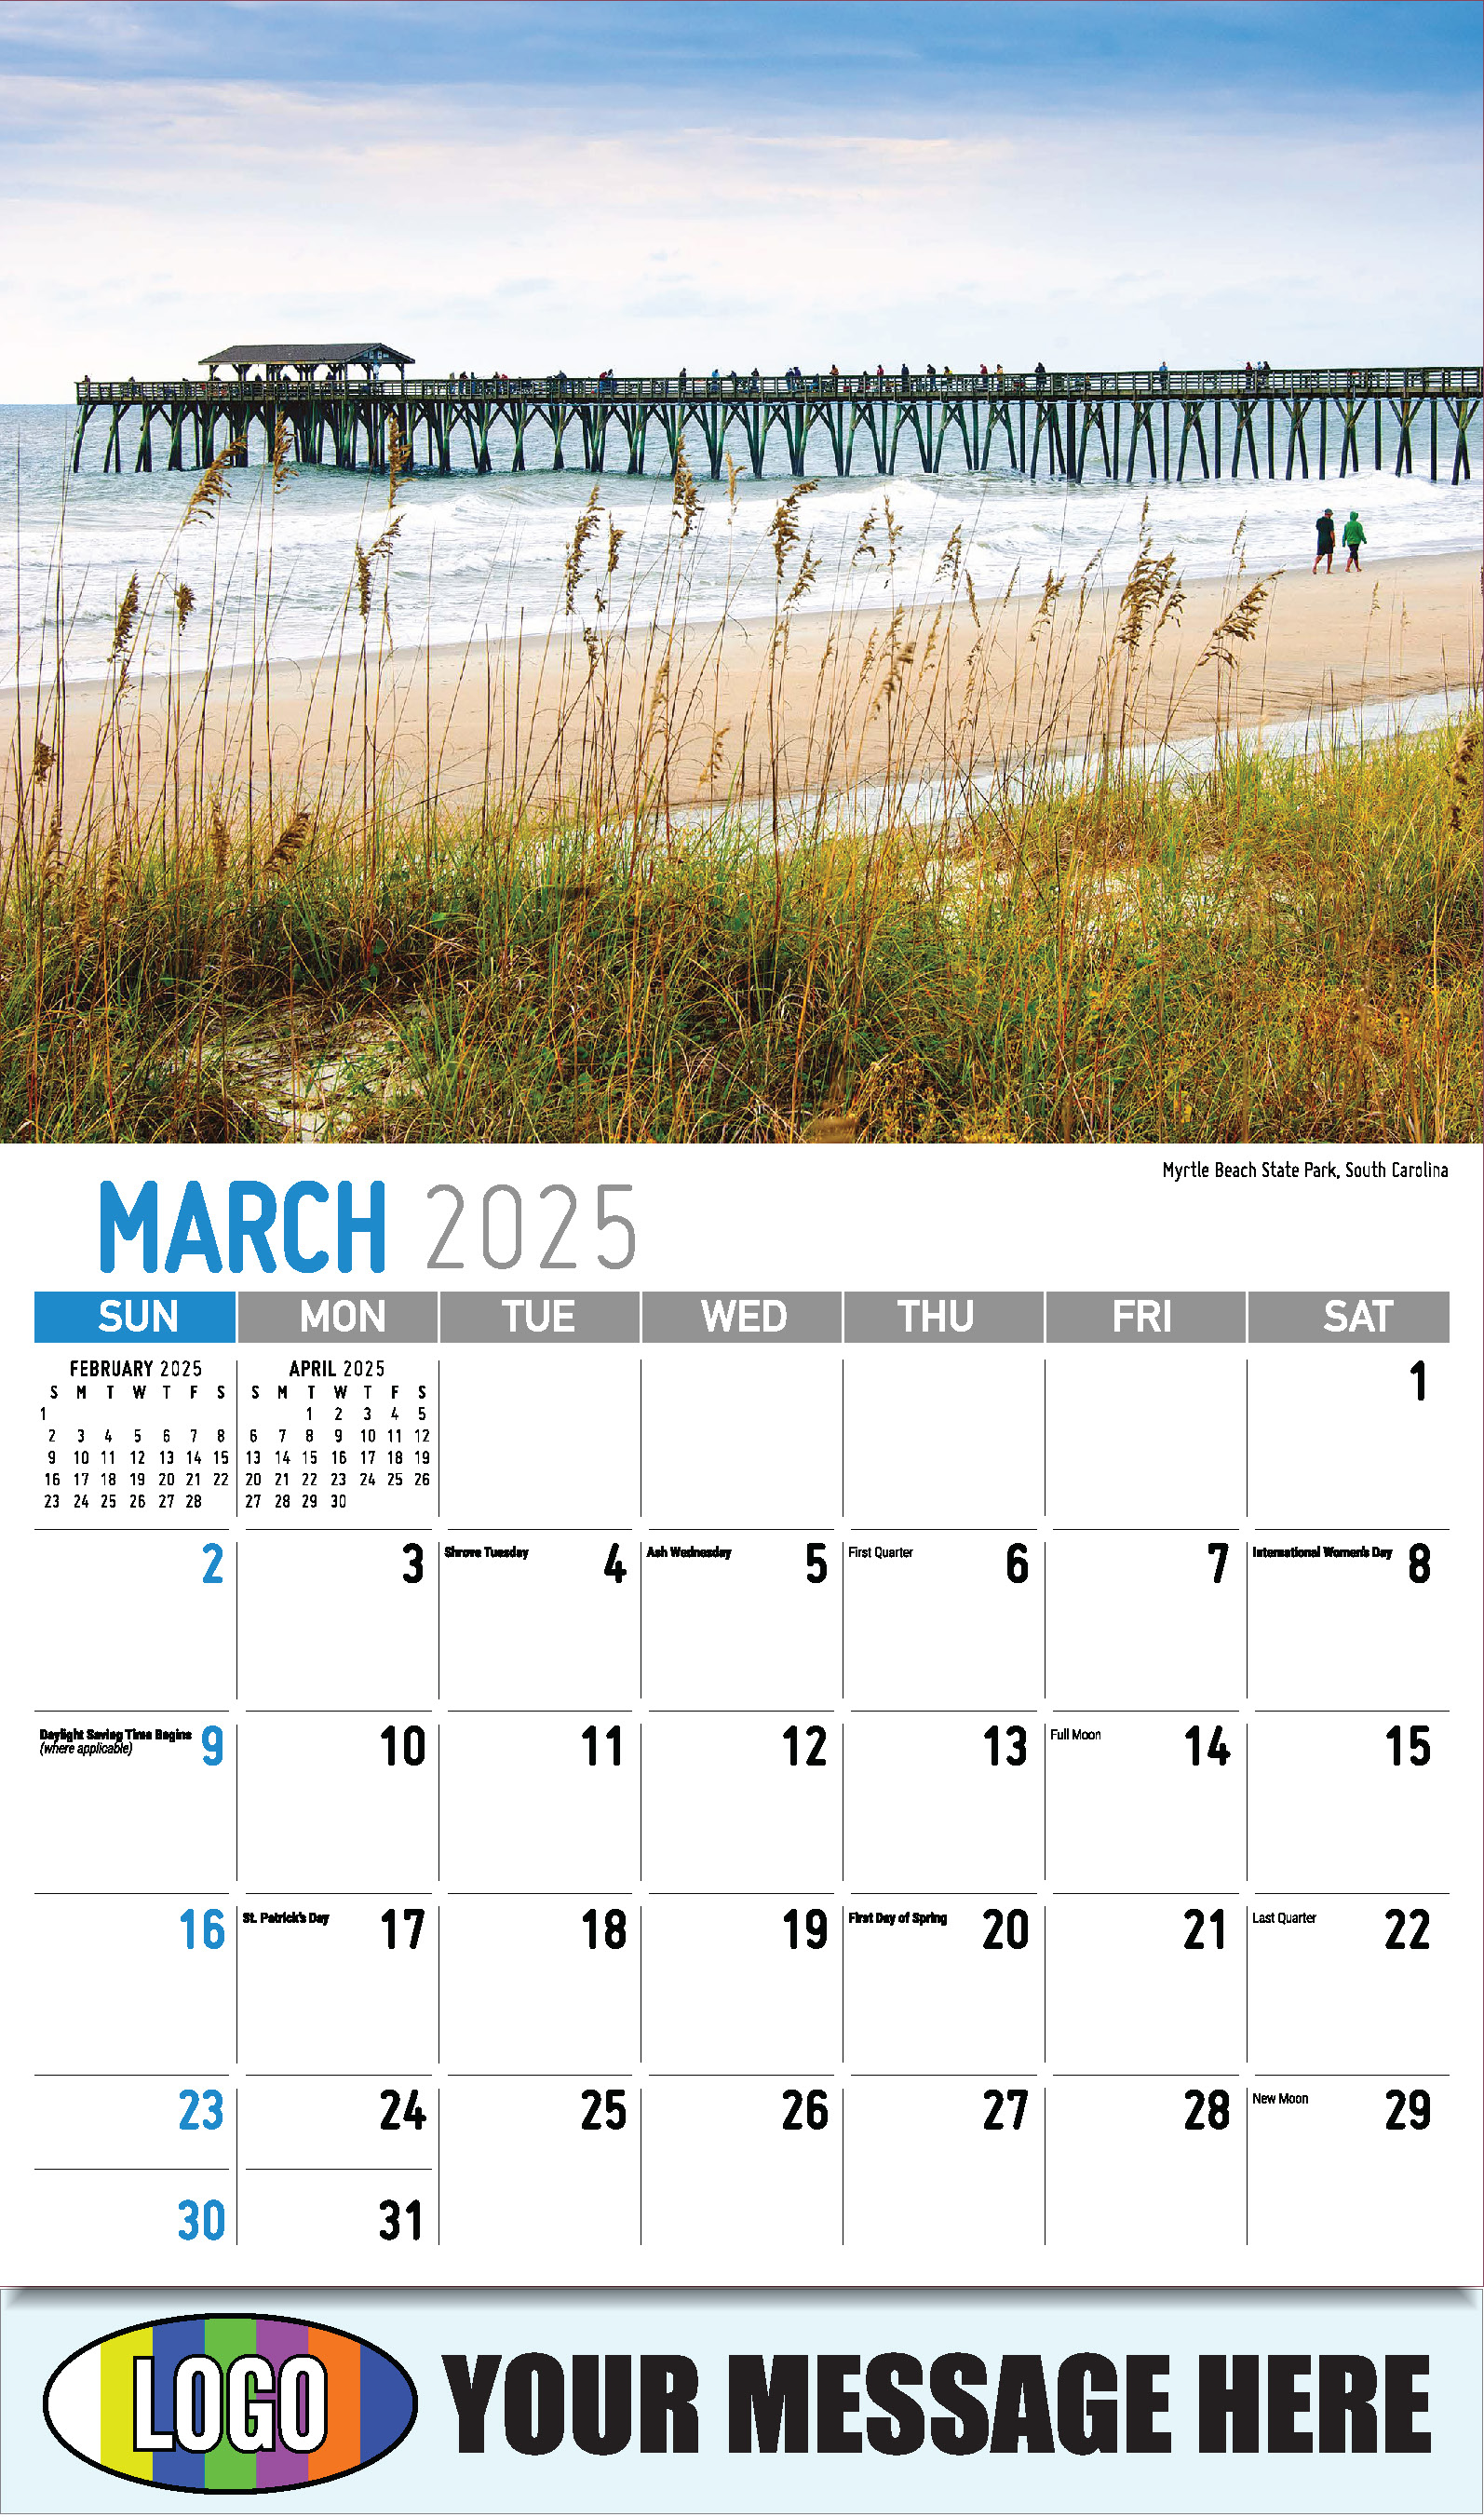 Scenes of Southeast USA 2025 Business Promo Wall Calendar - March